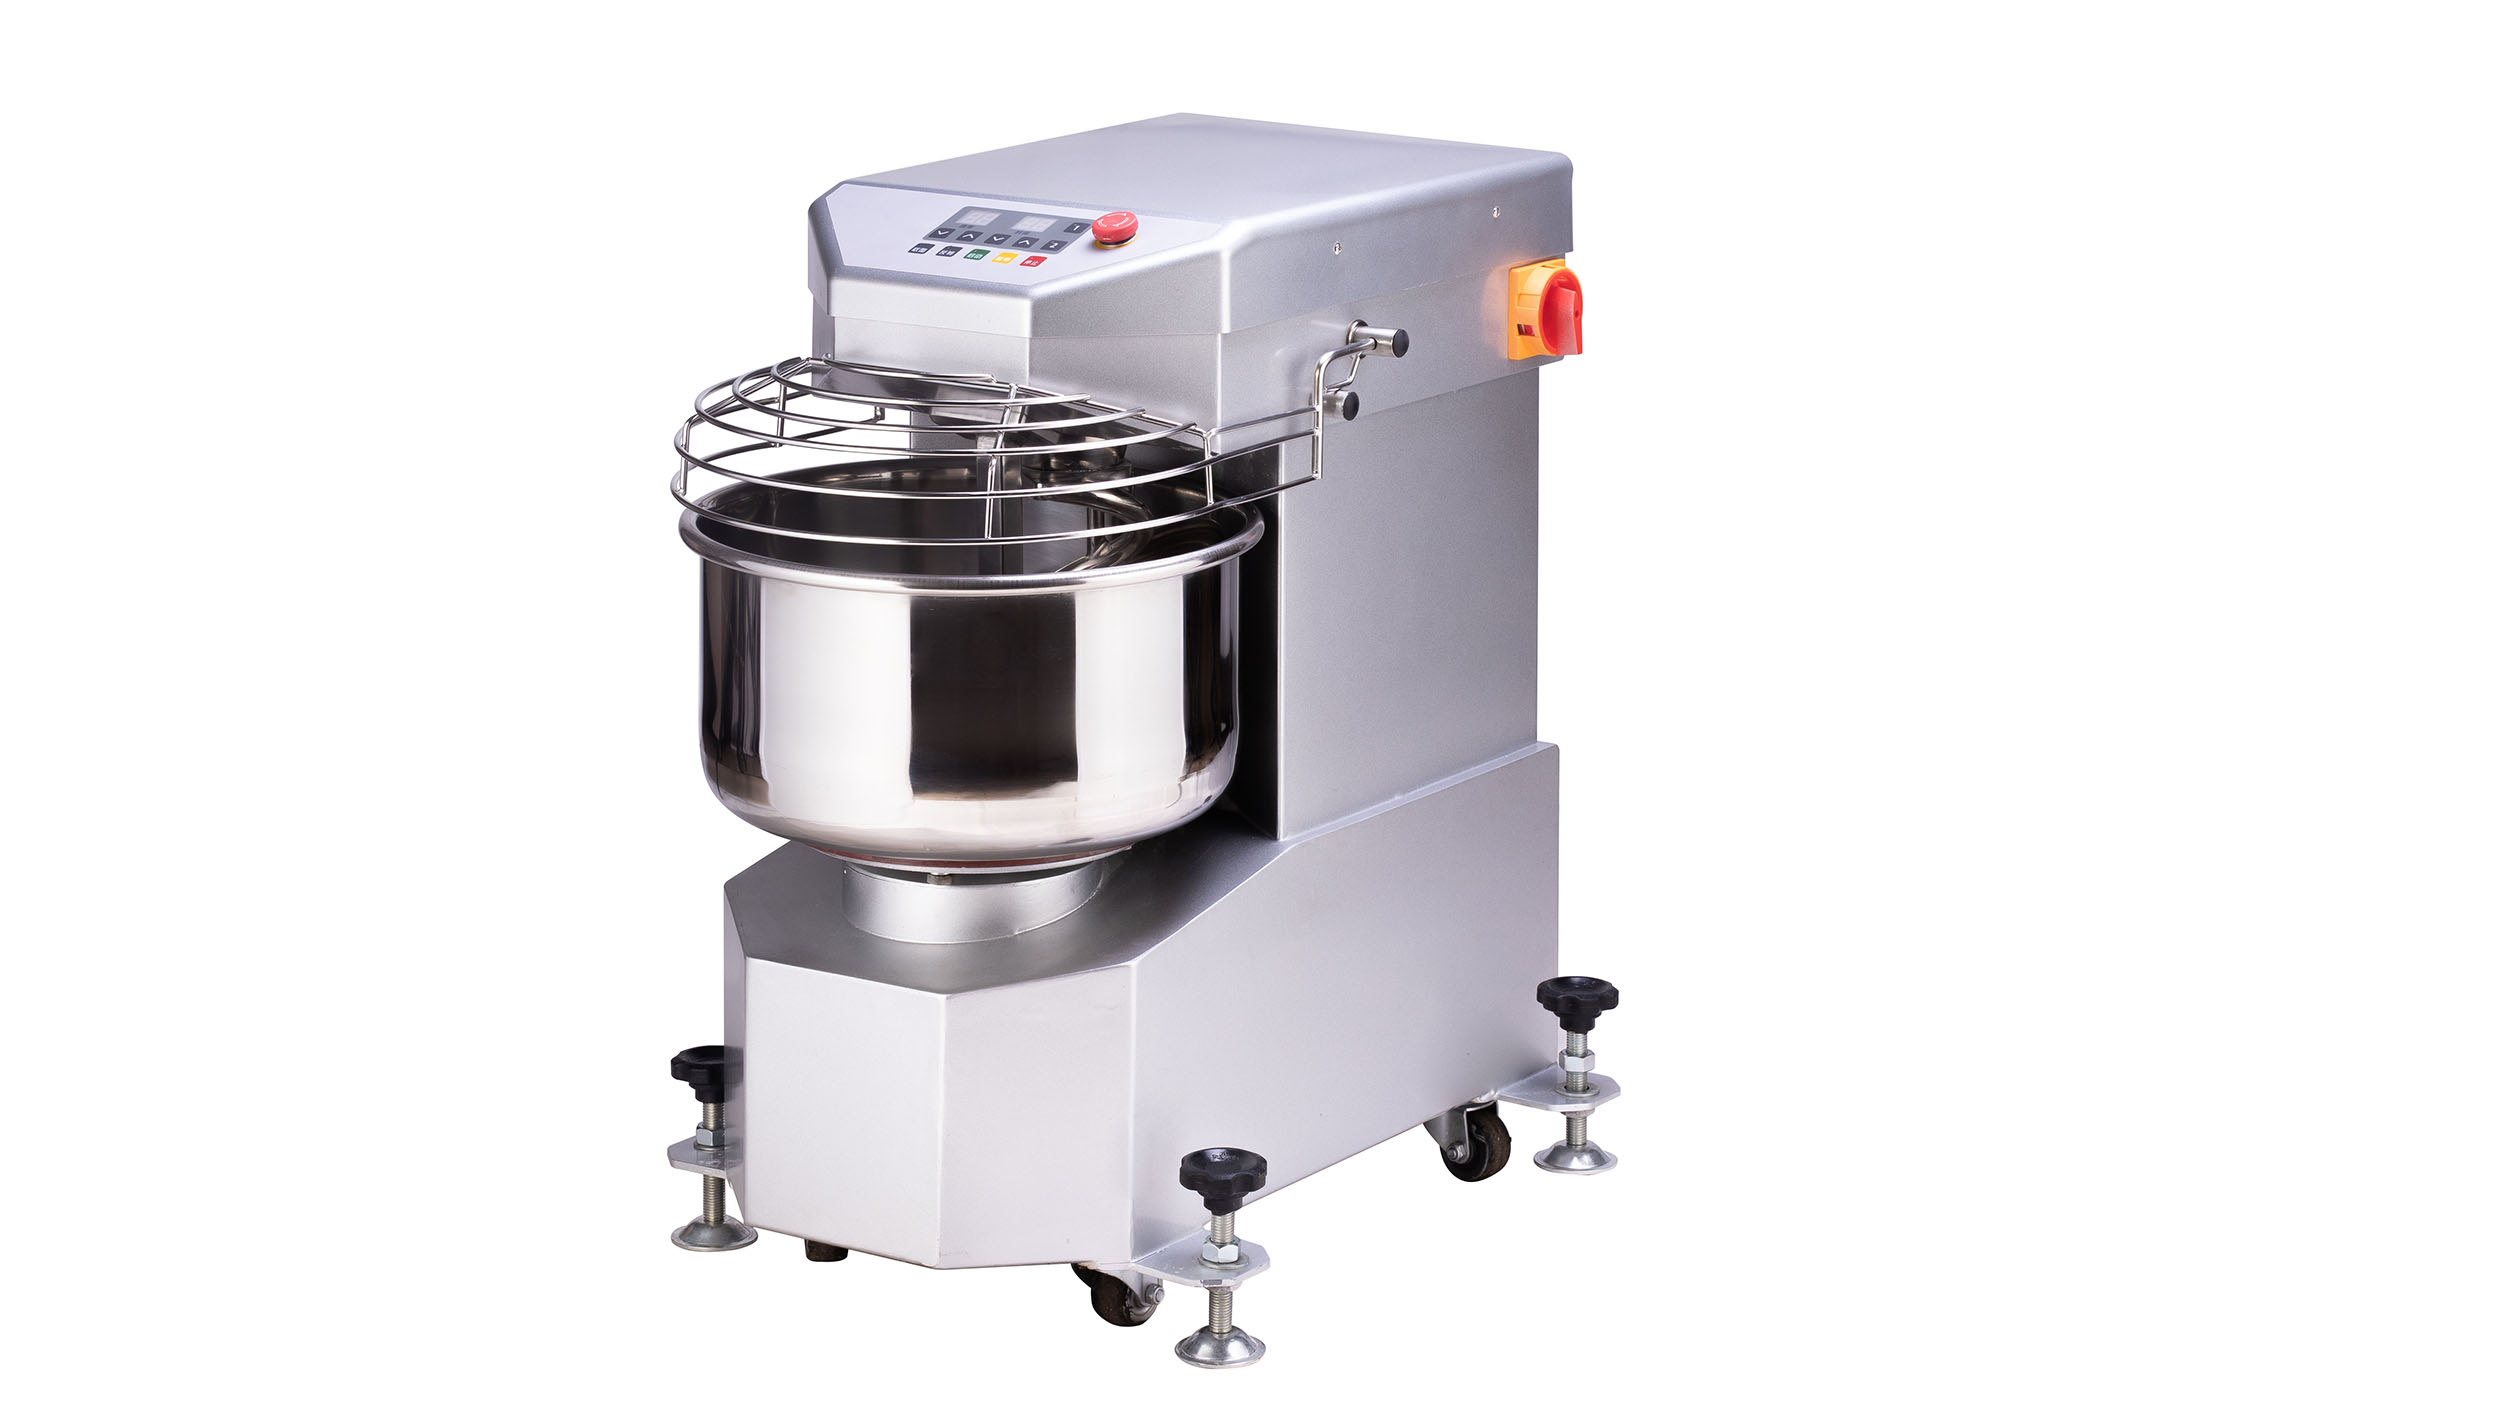 Rolling kitchen cart for spiral dough mixers, made in USA!